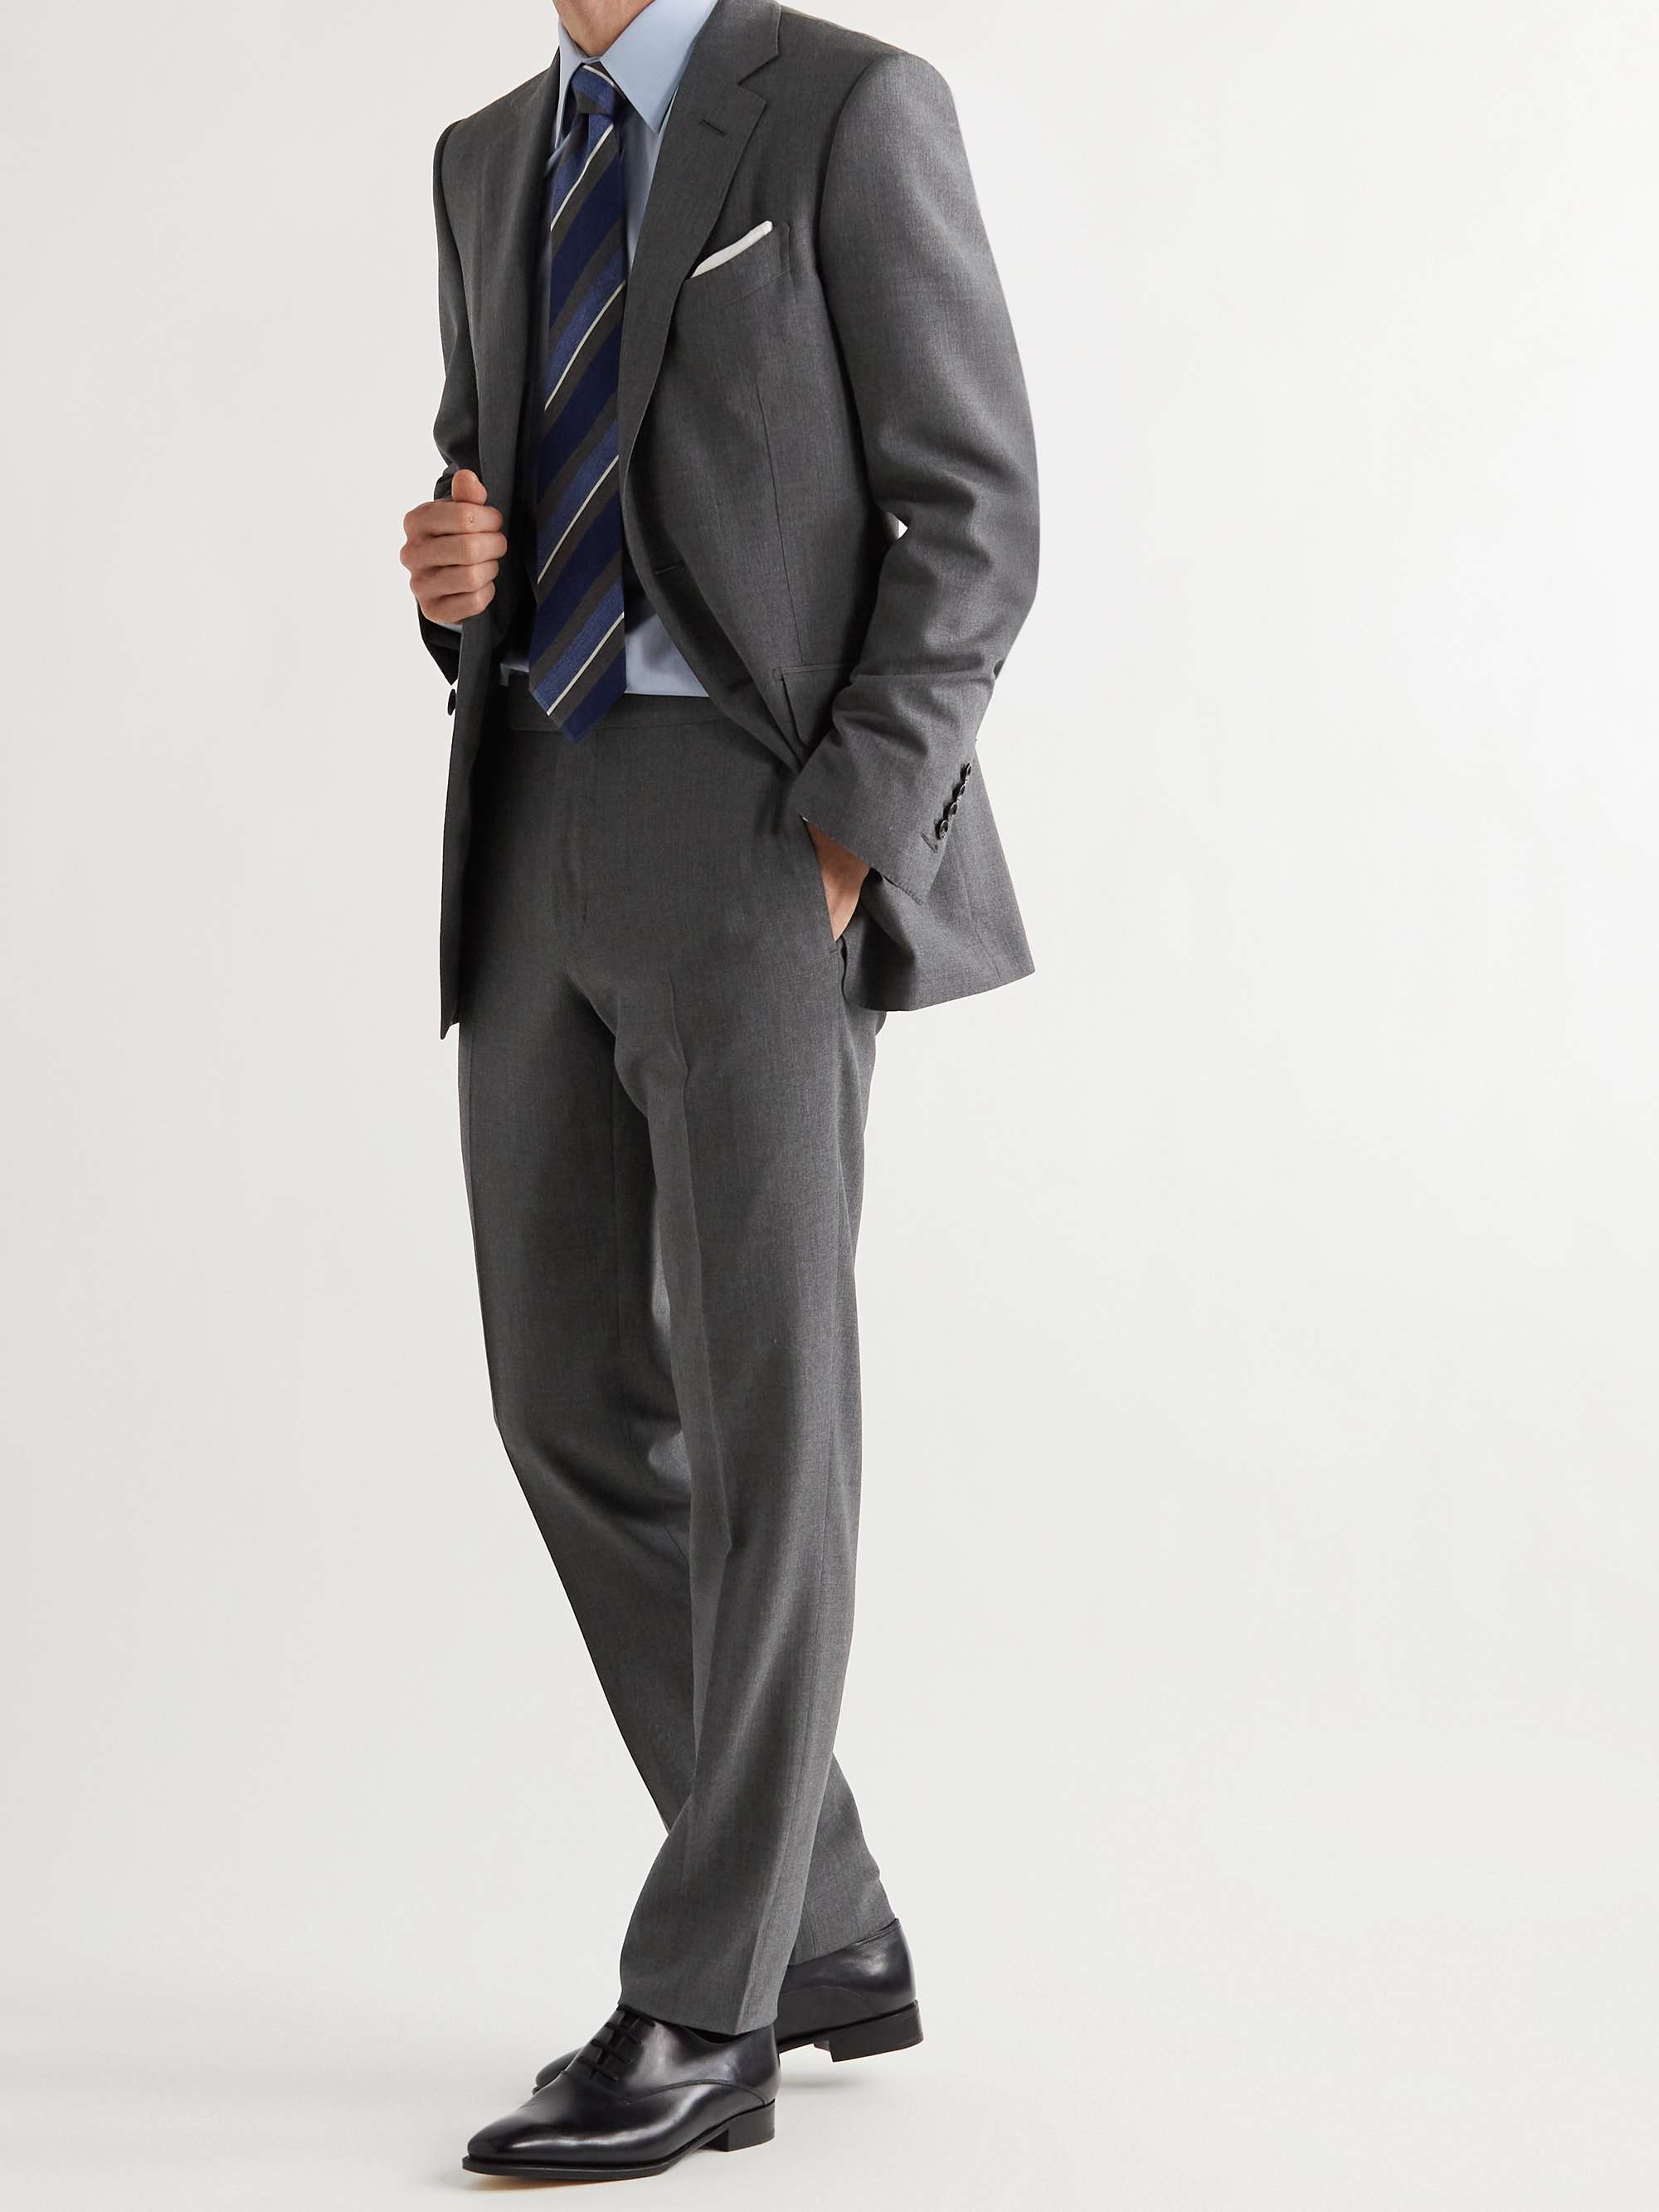 Tom Ford Oconnor Slim-fit Wool Suit Trousers in Grey for Men Slacks and Chinos Formal trousers Mens Clothing Trousers 